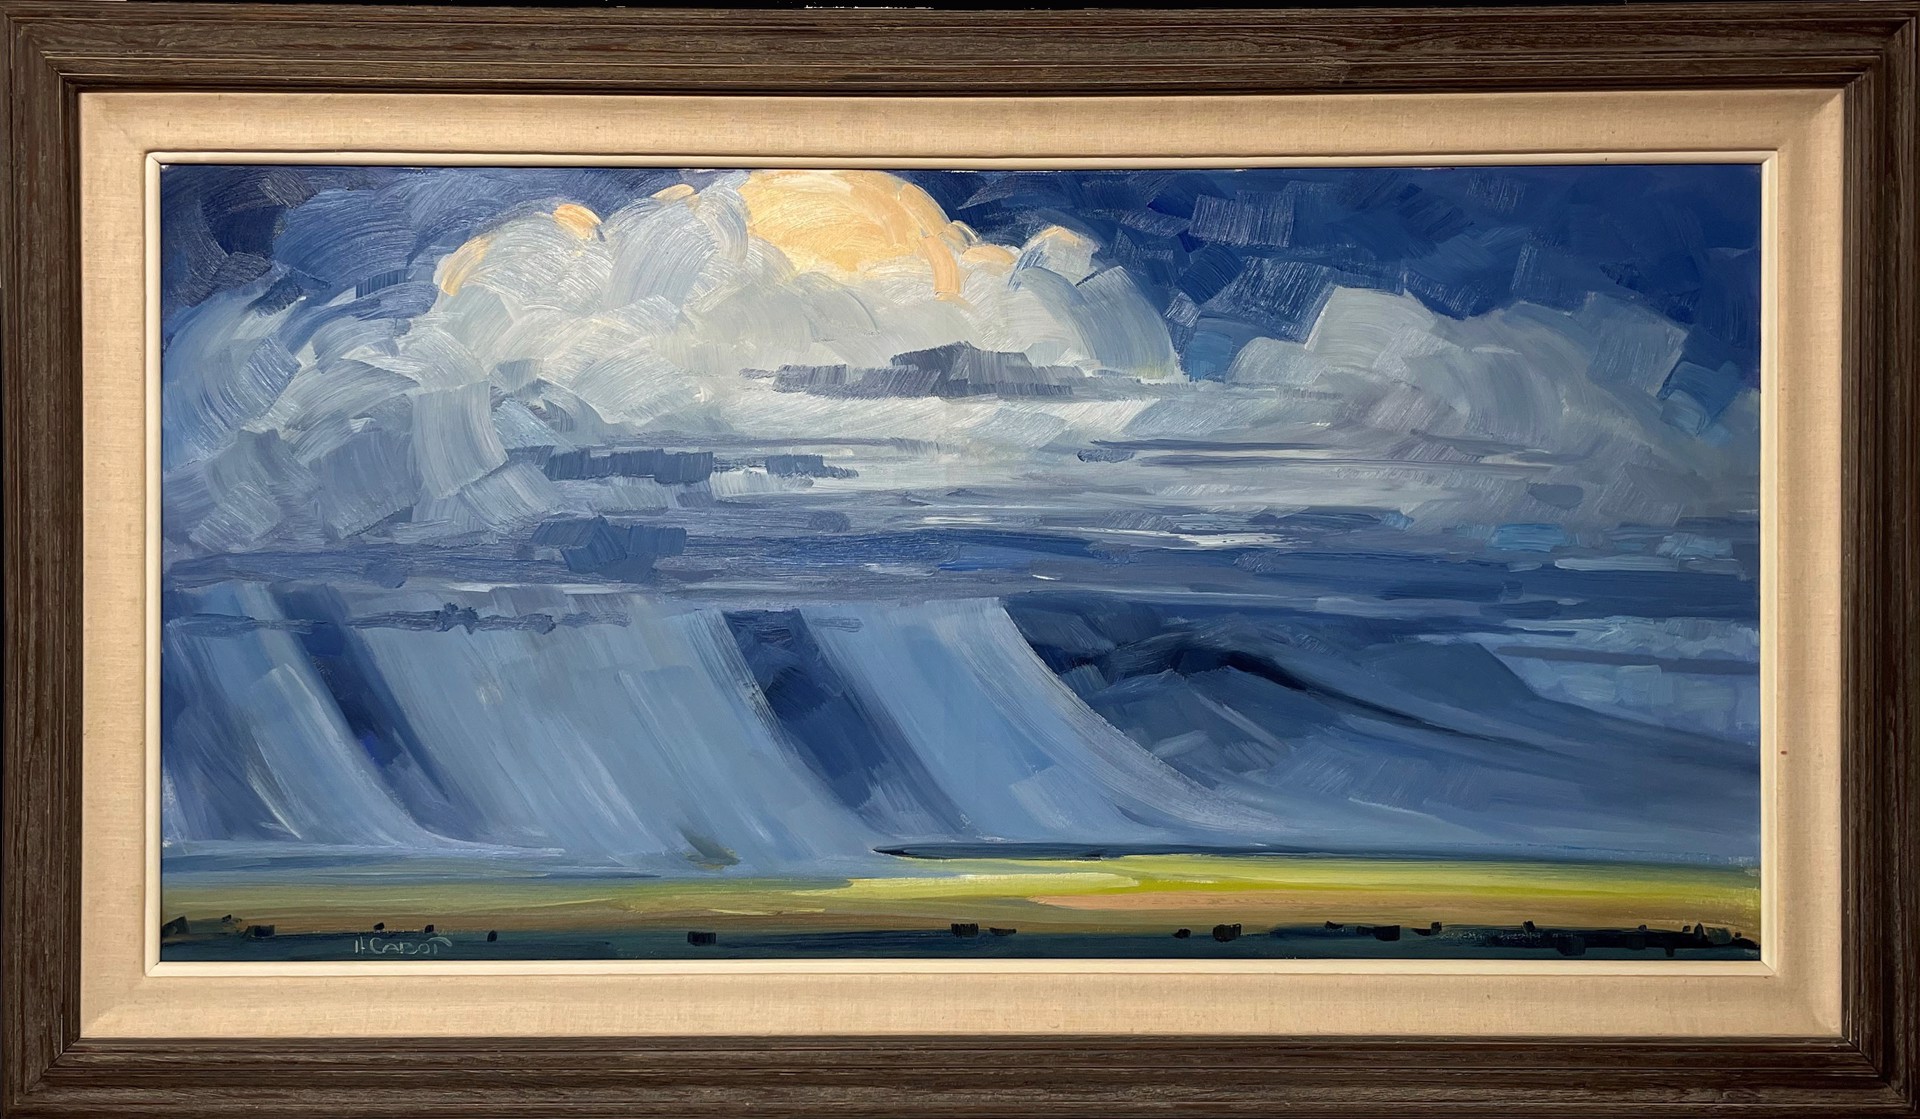 Monsoon Season ~ Includes authenticity certificate signed by Hugh Cabot by Originals Hugh Cabot